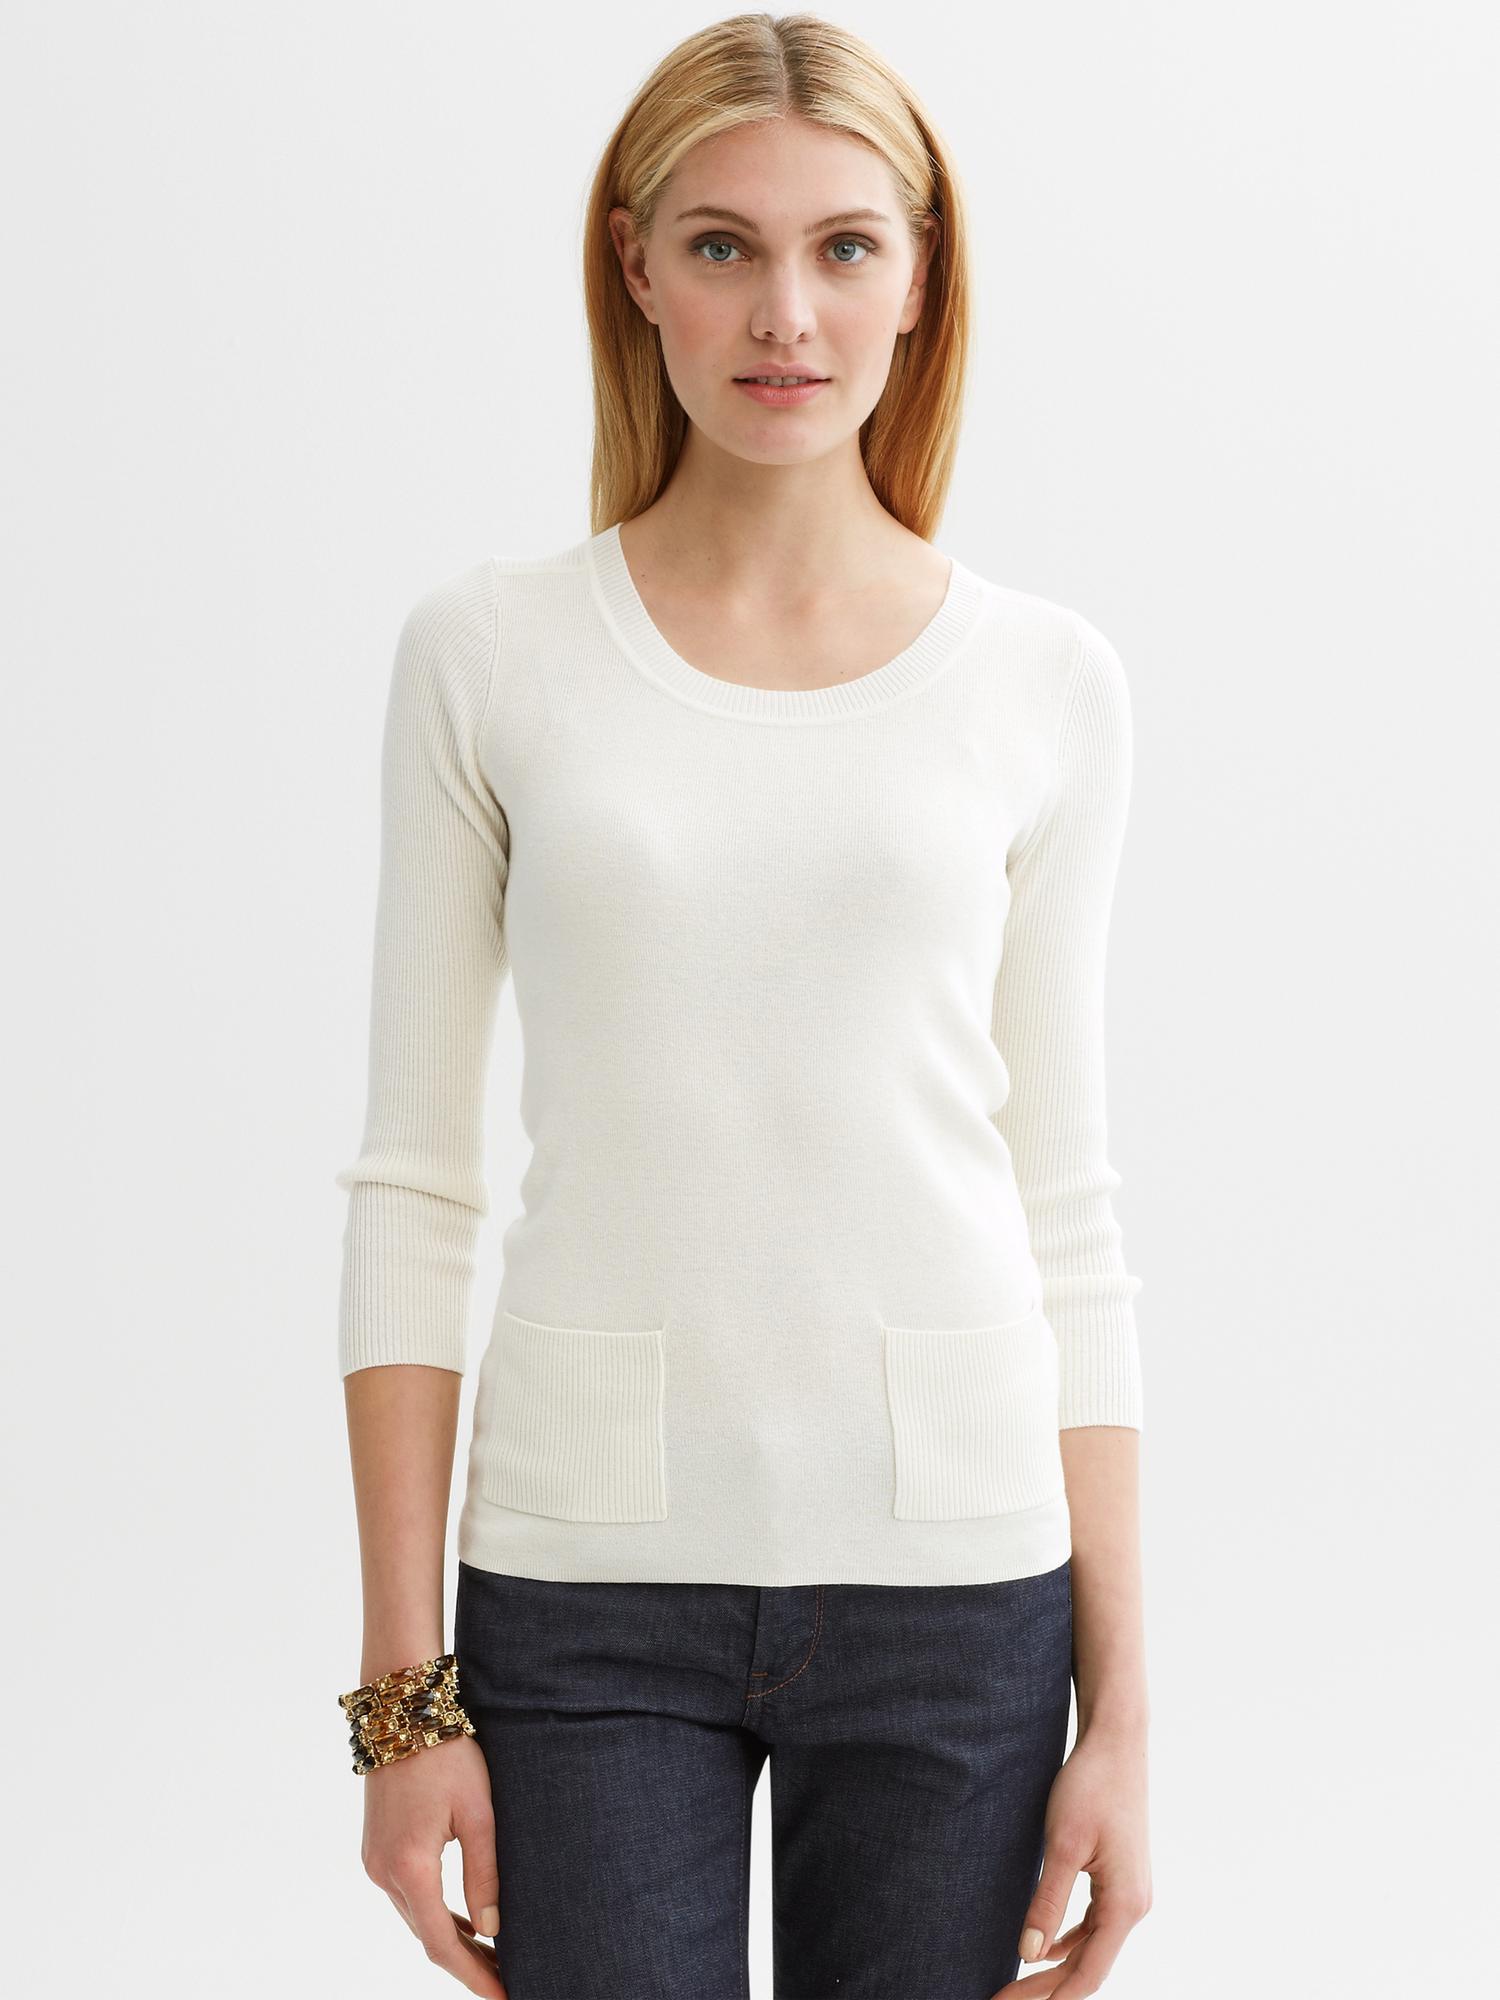 Patch pocket pullover